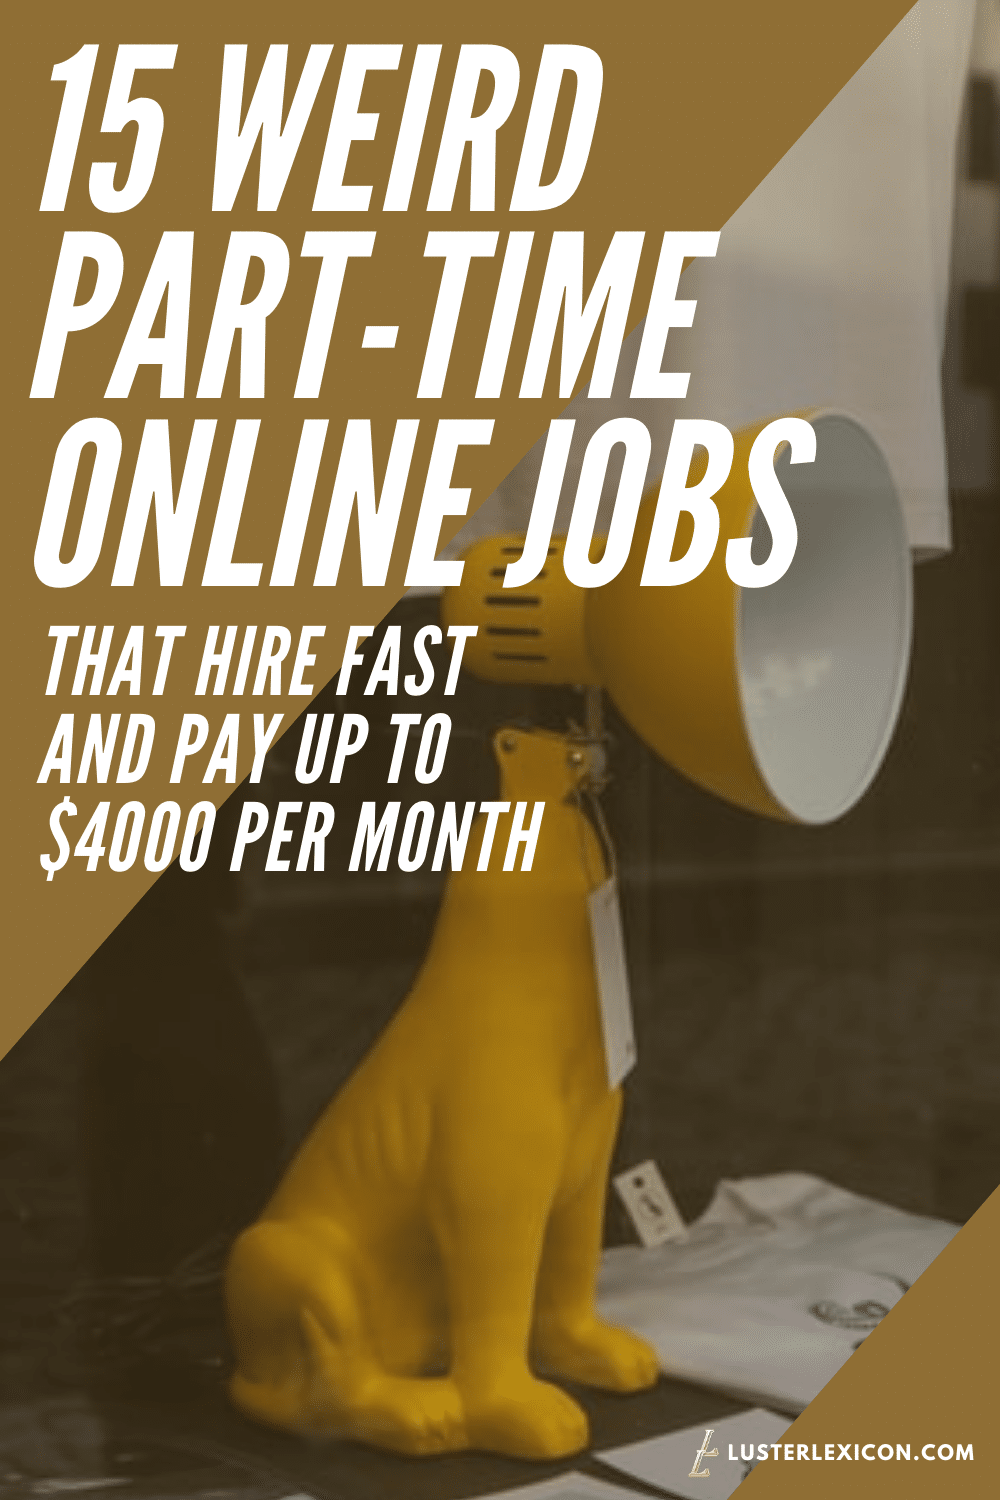 15 Best Part-time Jobs Online that Pay Well (Hiring Now) - Luster Lexicon